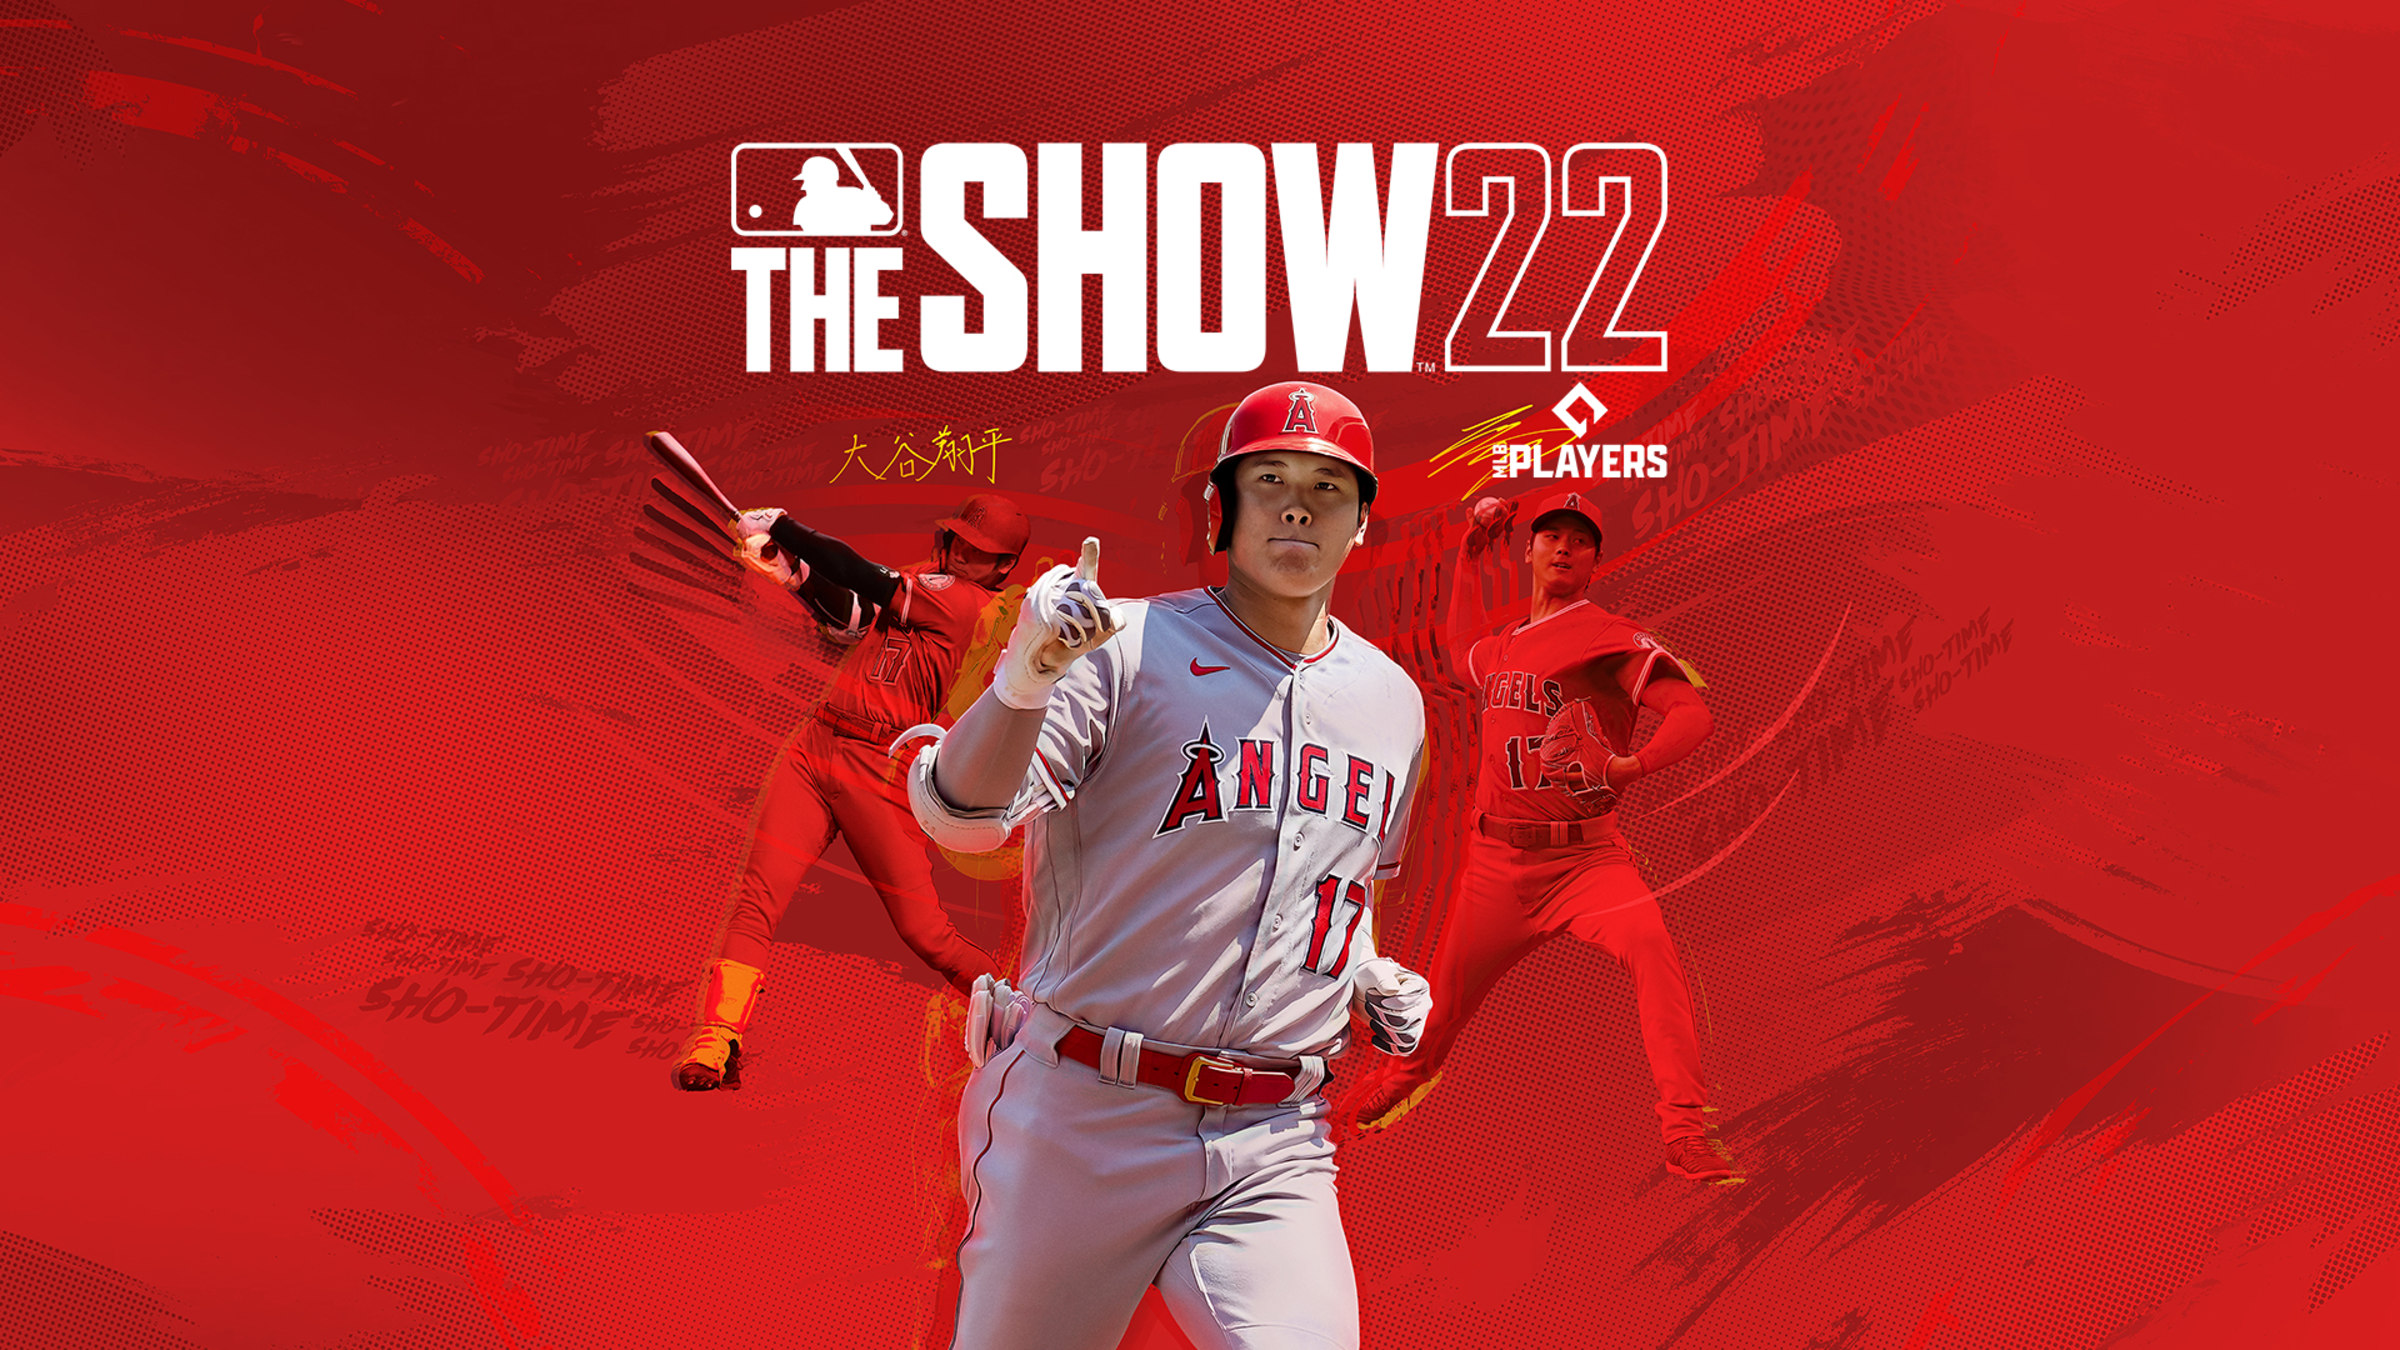 mlb-the-show-22-for-nintendo-switch-nintendo-official-site